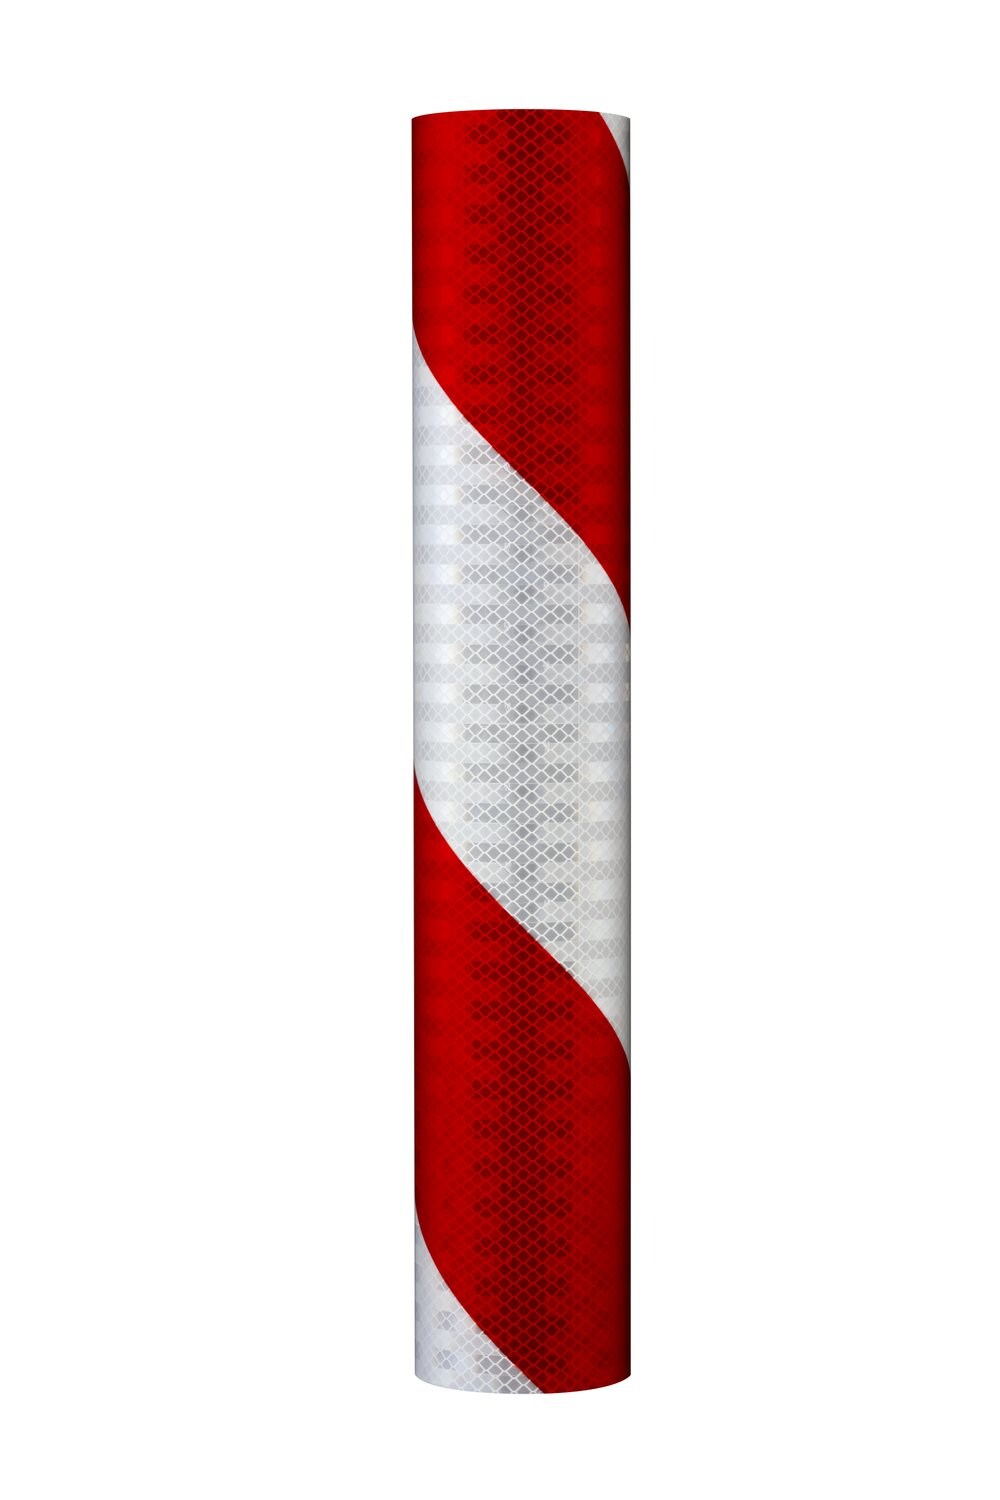 7100113311 - 3M Flexible Prismatic Reflective Barricade Sheeting 3336R Red/White, 6
in stripe/right, Configurable sheet